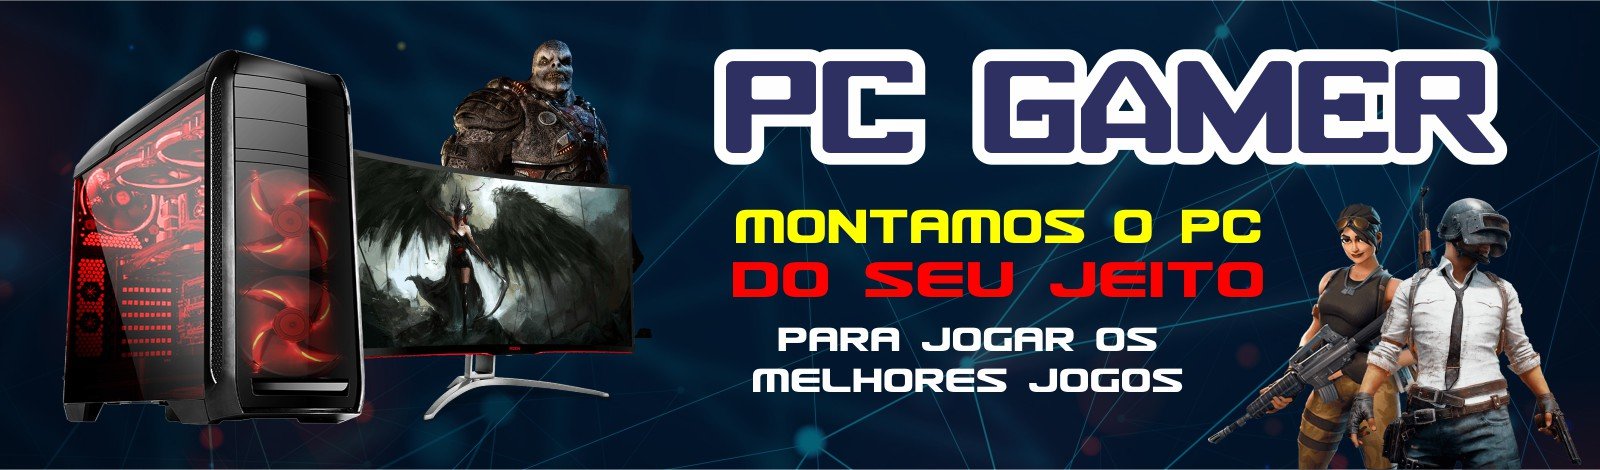 BANNERS monte pc